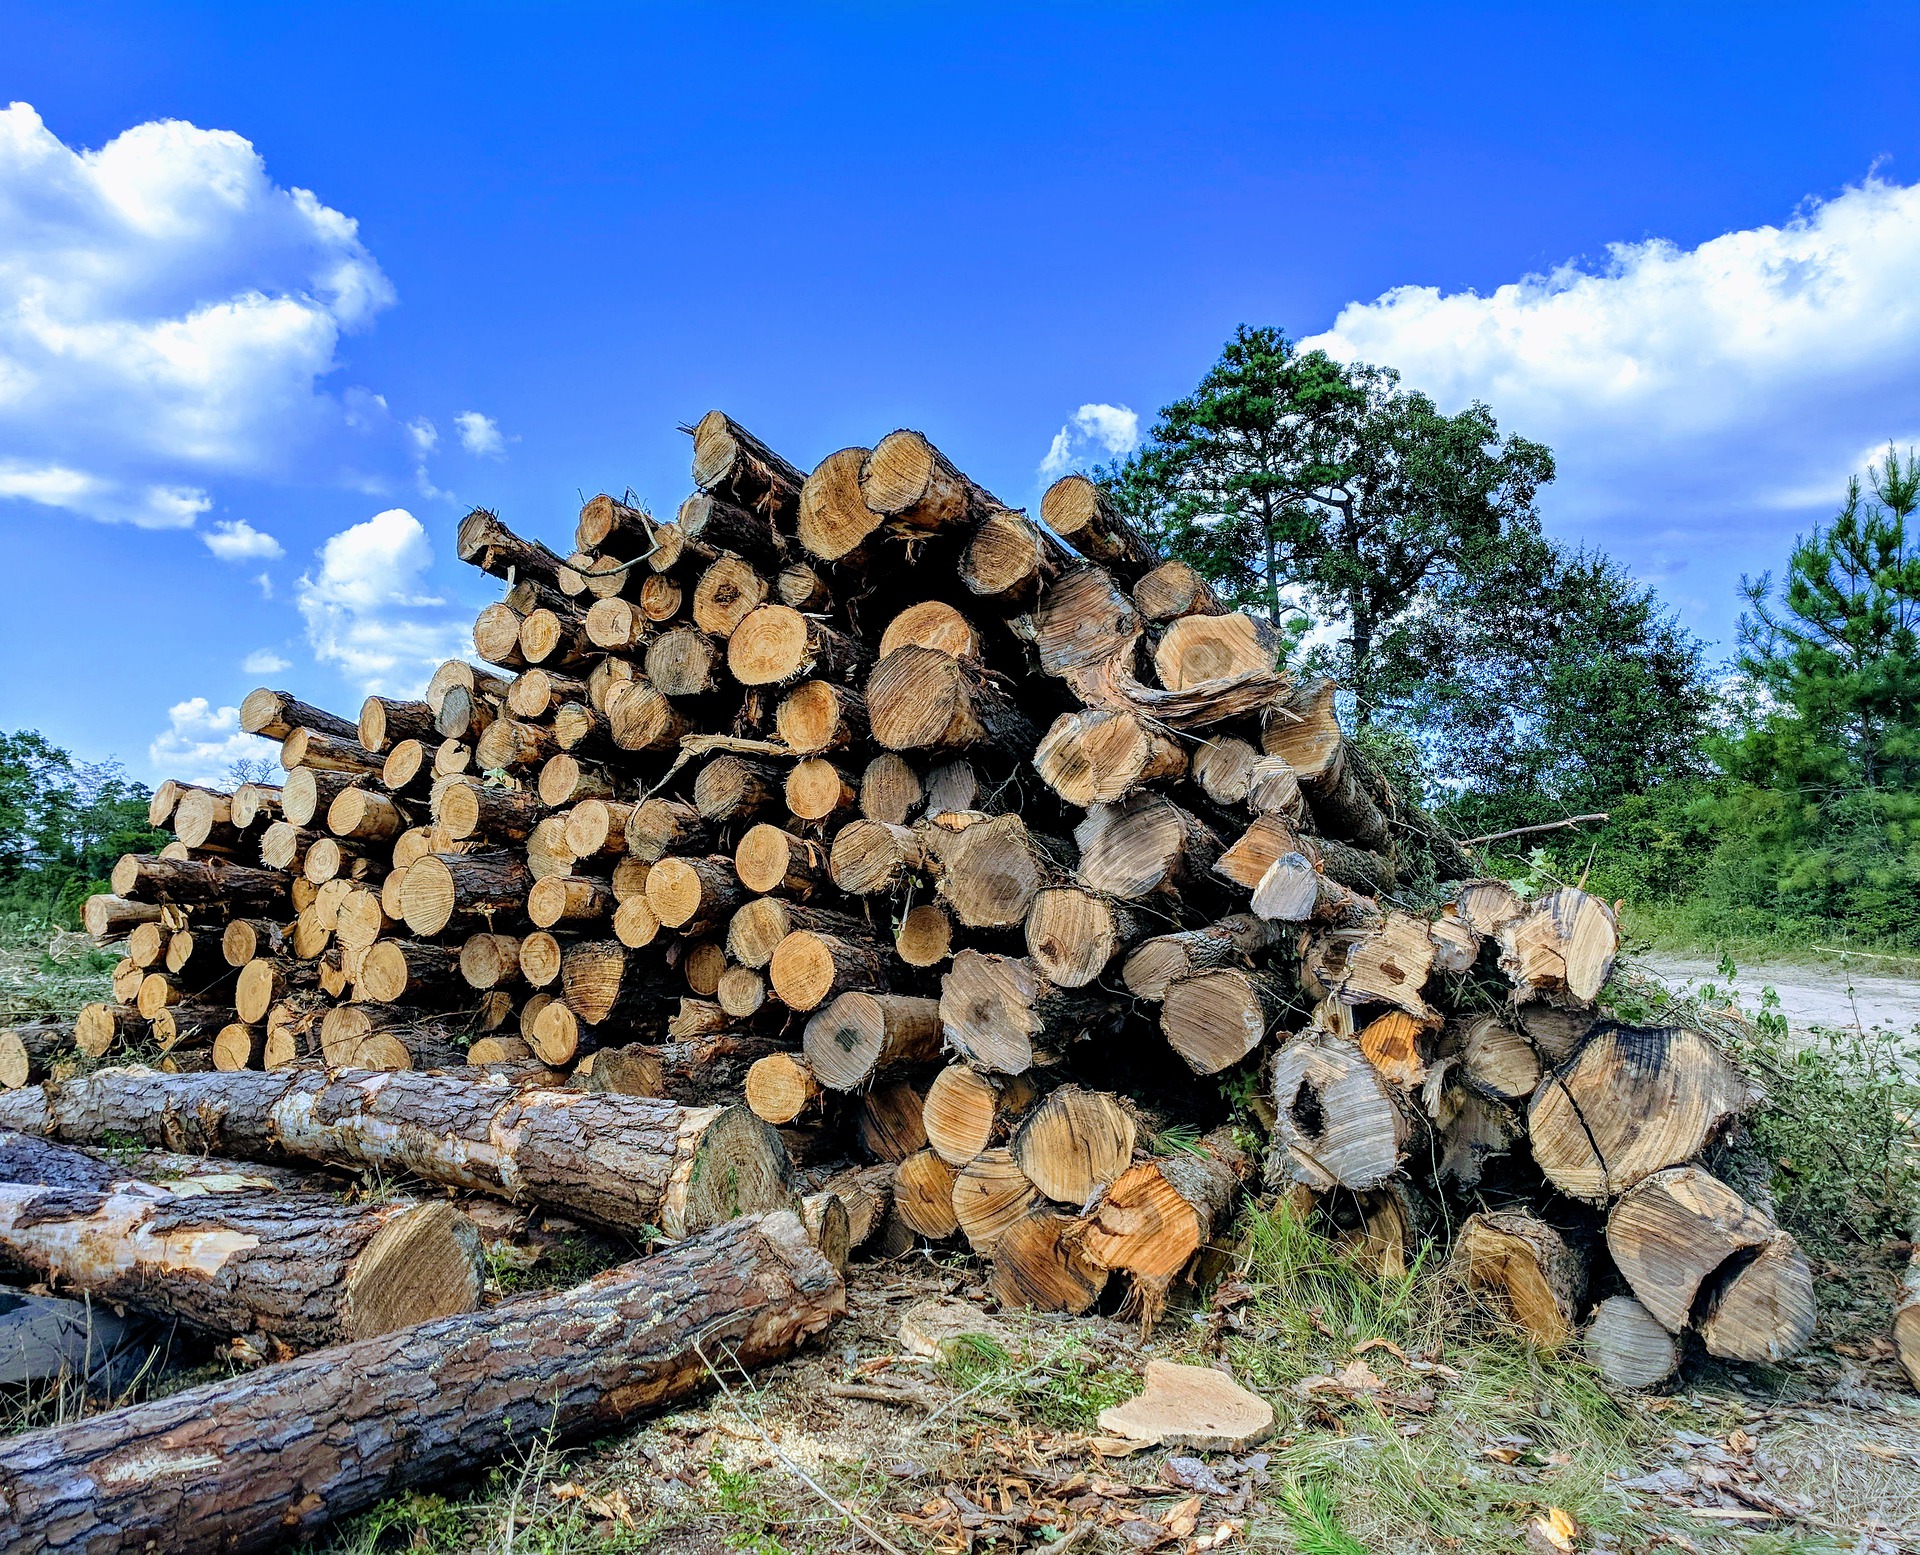 A stack of logs against a bright clear sky